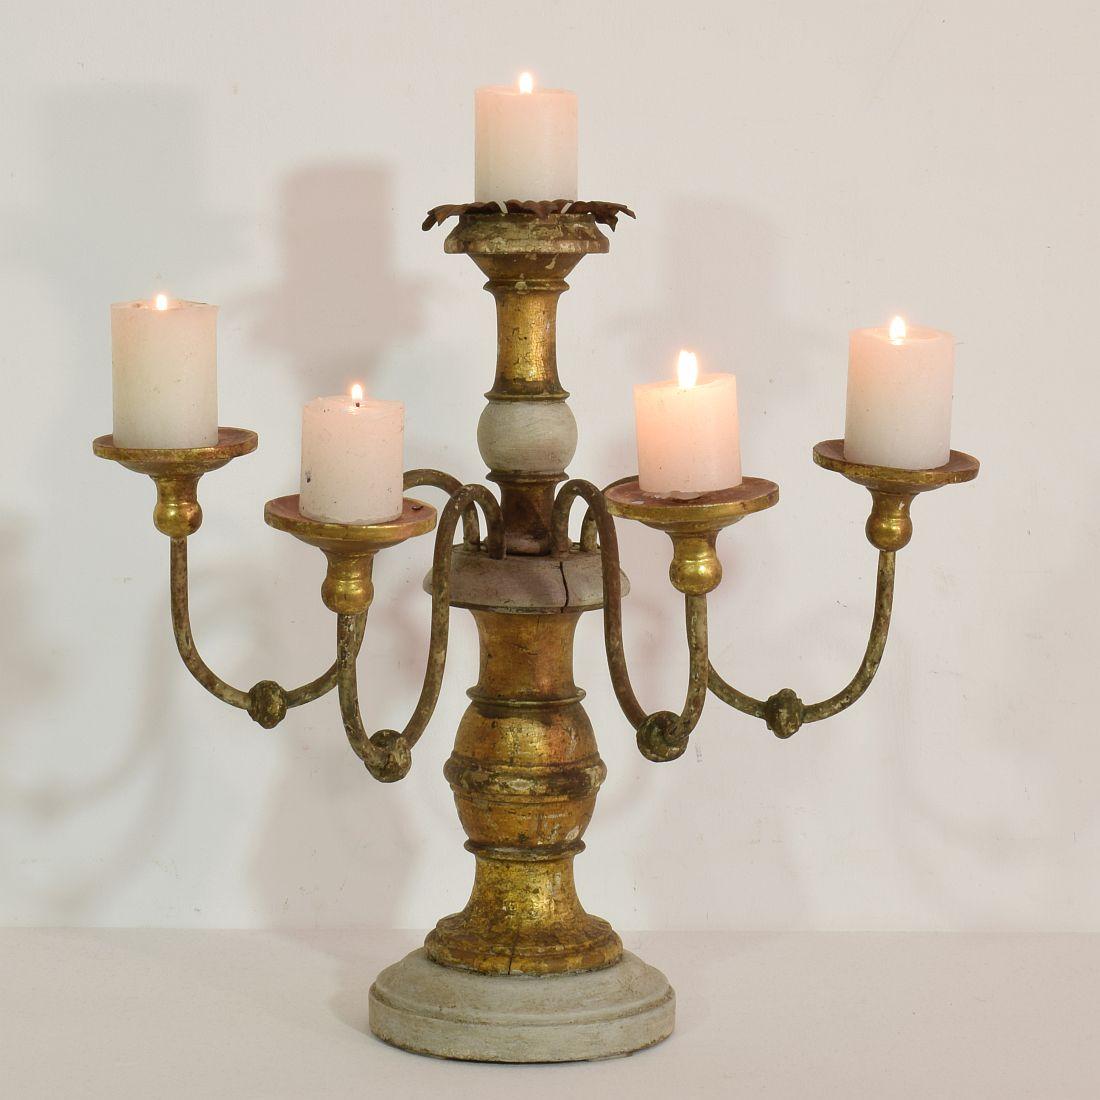 Beautiful candleholder with its original gilding and beautiful color.
Italy, 19th century. Weathered, small losses and old repairs. Measurement includes the iron peaks.